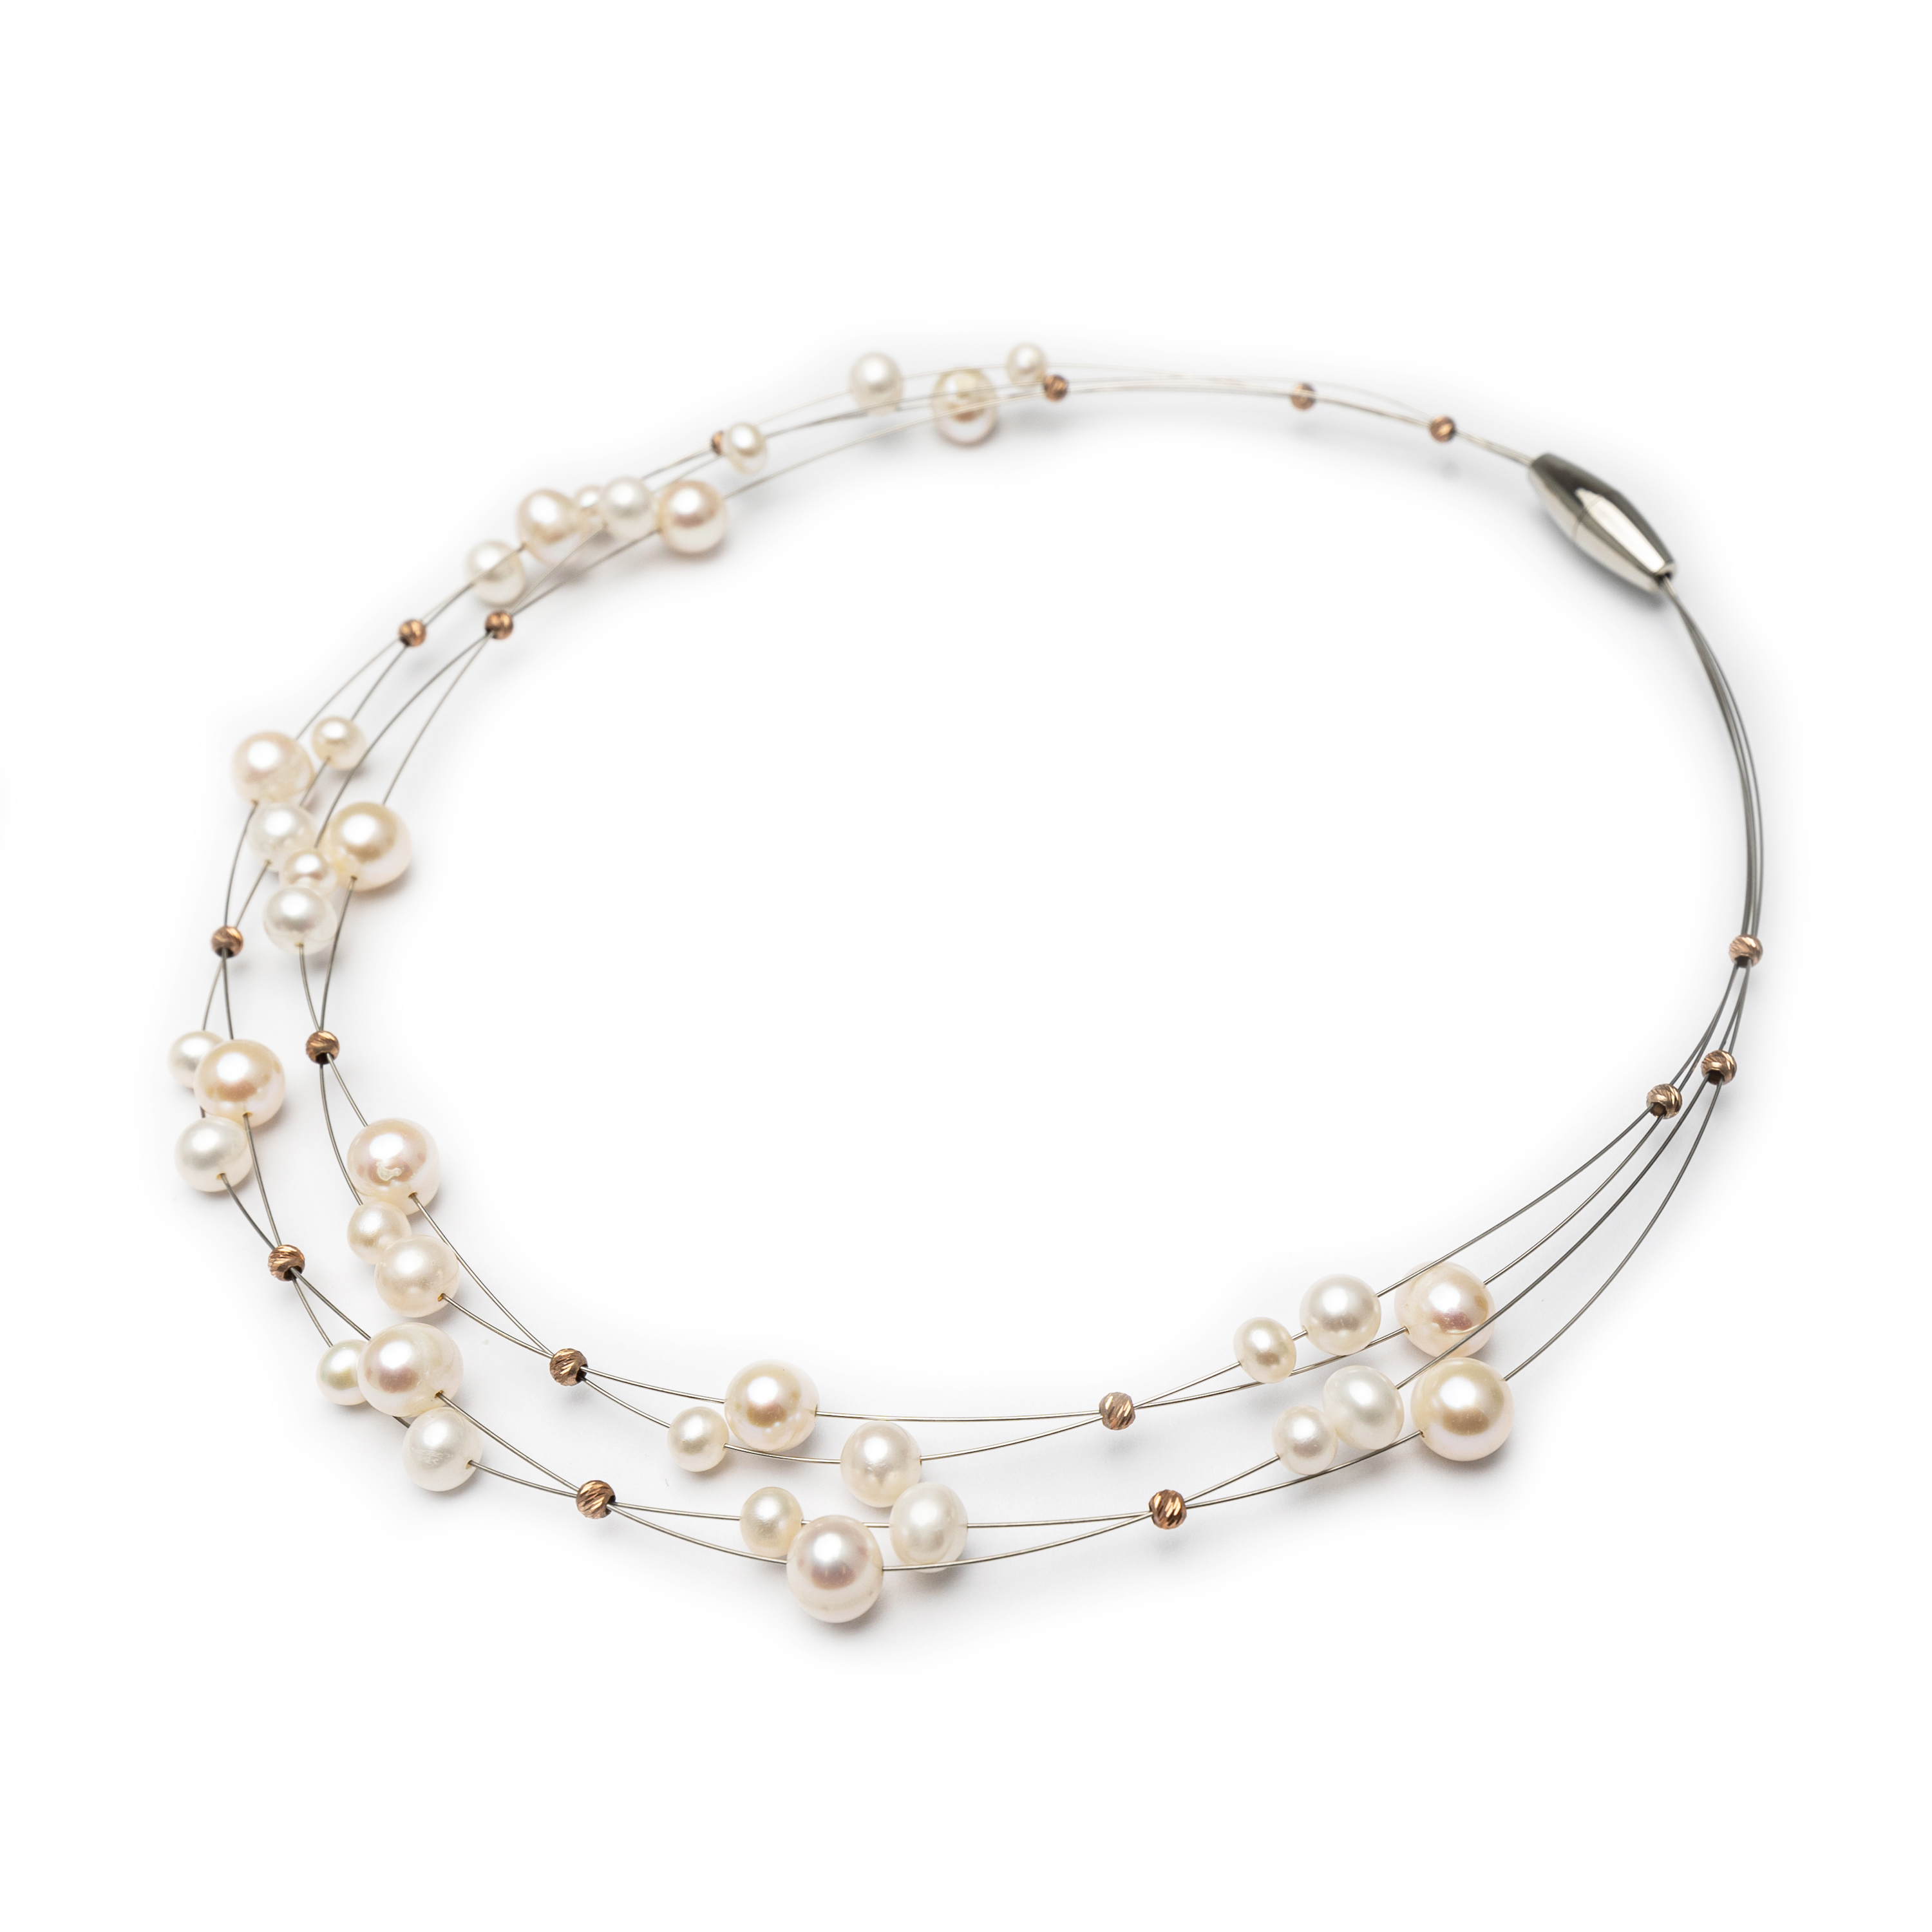 Silver 925 Fresh Water Pearl Collier.